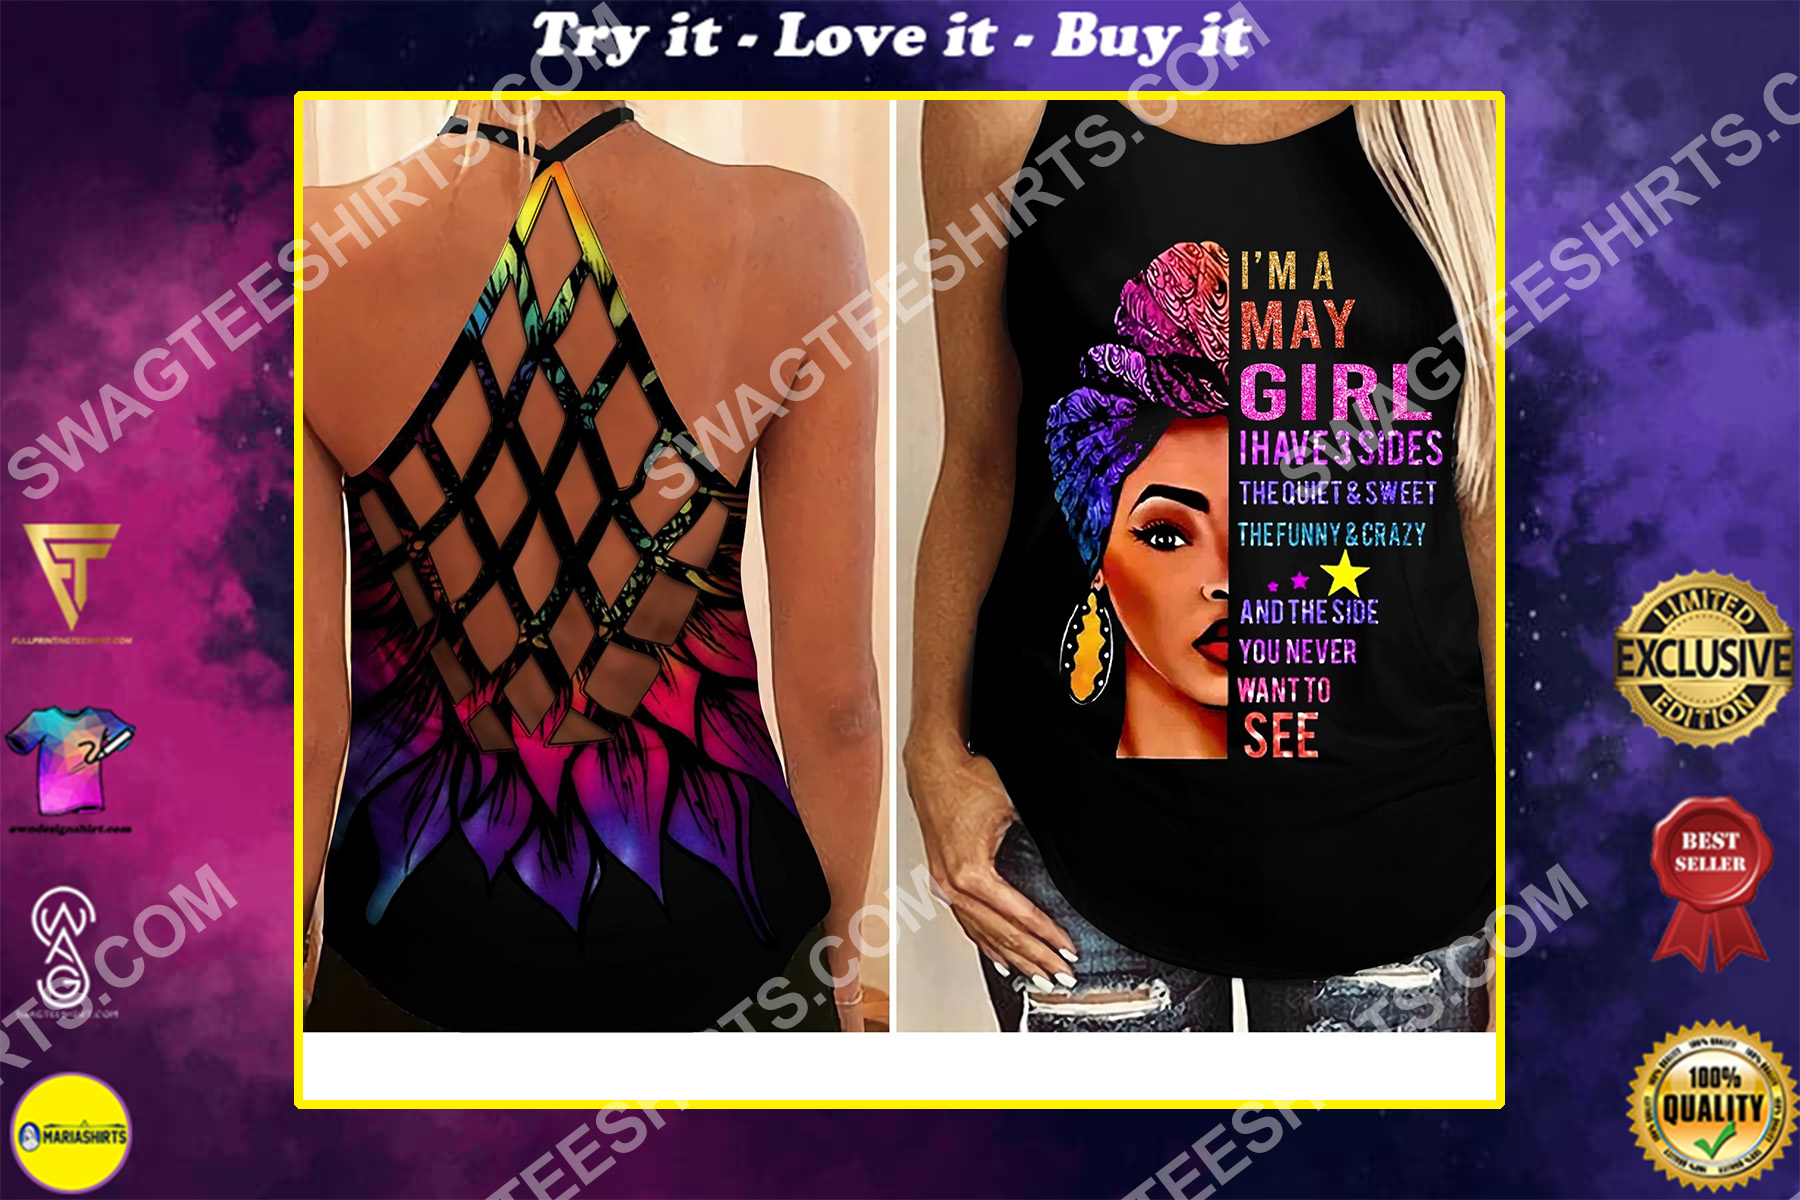 i'm a may girl i have 3 sides the quiet and sweet all over printed criss-cross tank top